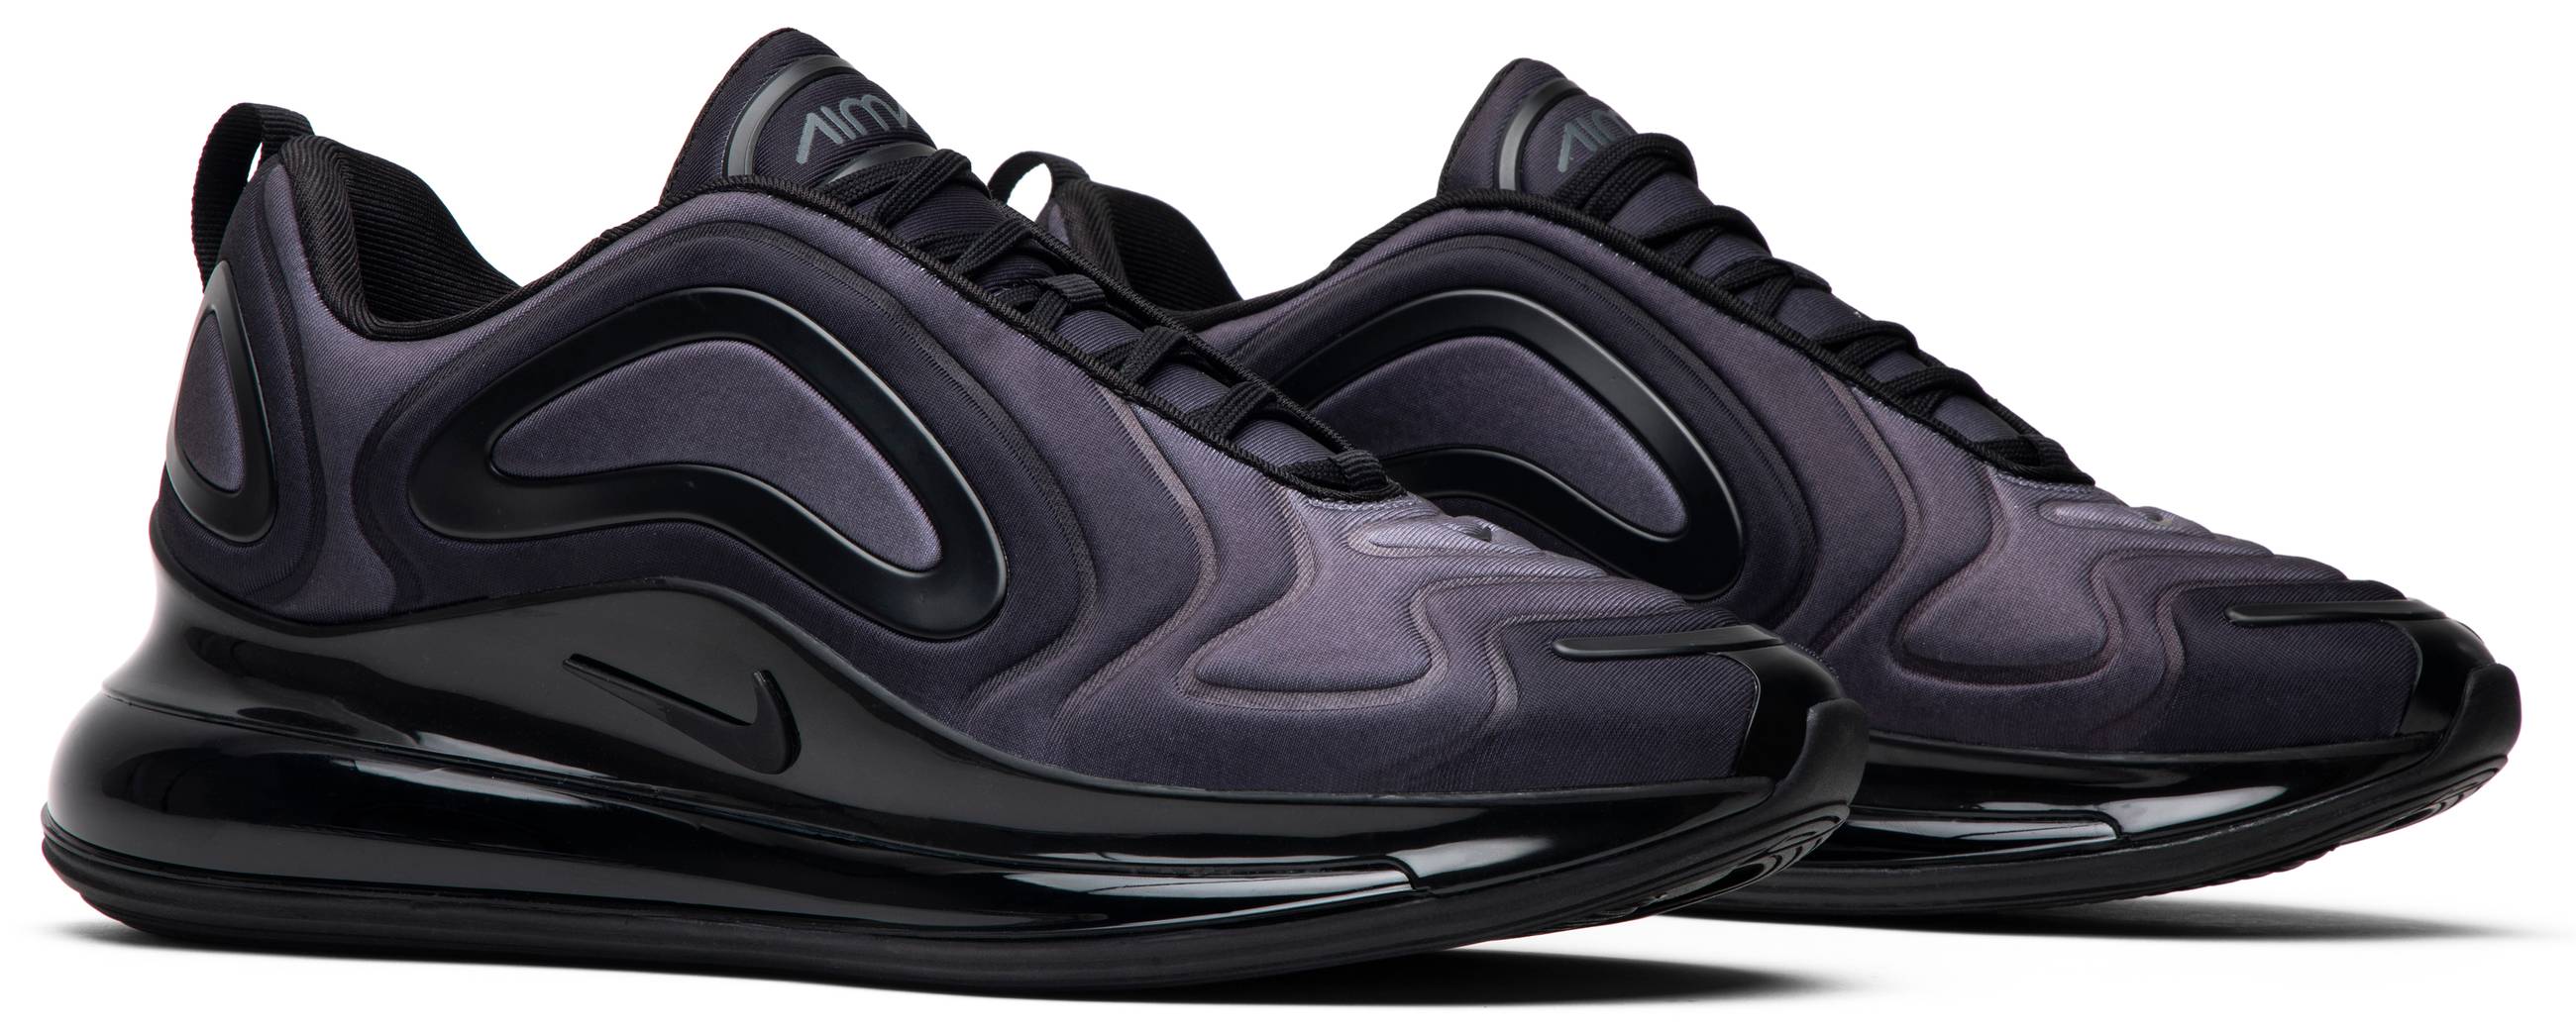 Air Max 720 'Total Eclipse' - Nike - AO2924 004 | GOAT